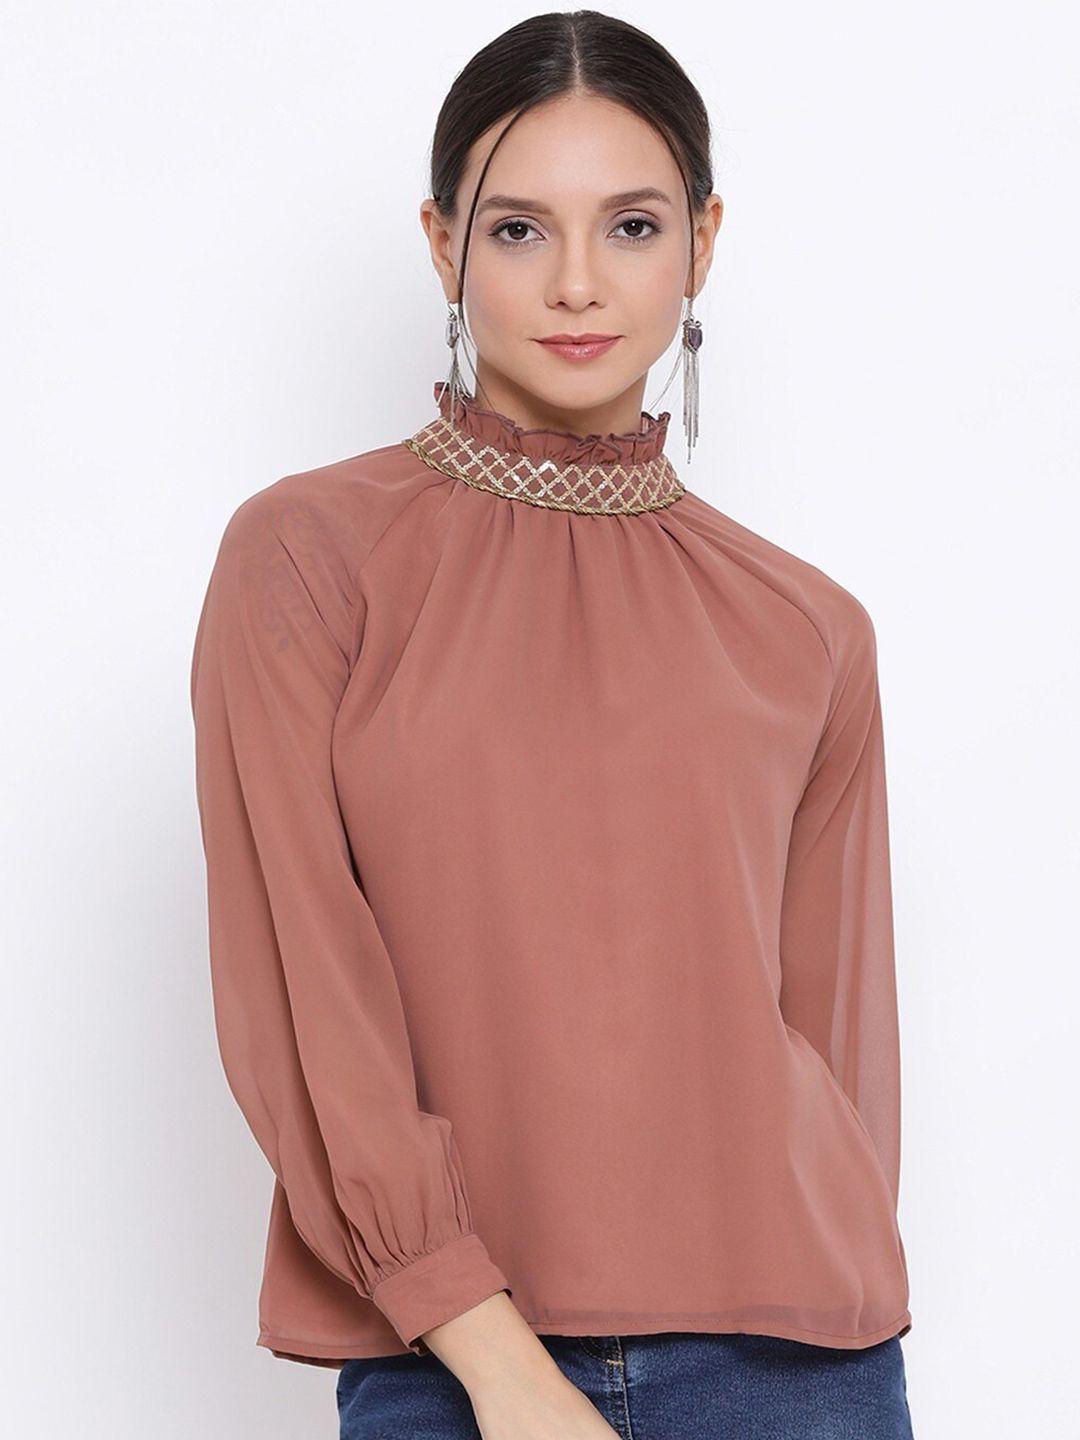 BAESD Sequinned Embellished High Neck Cuffed Sleeves Top